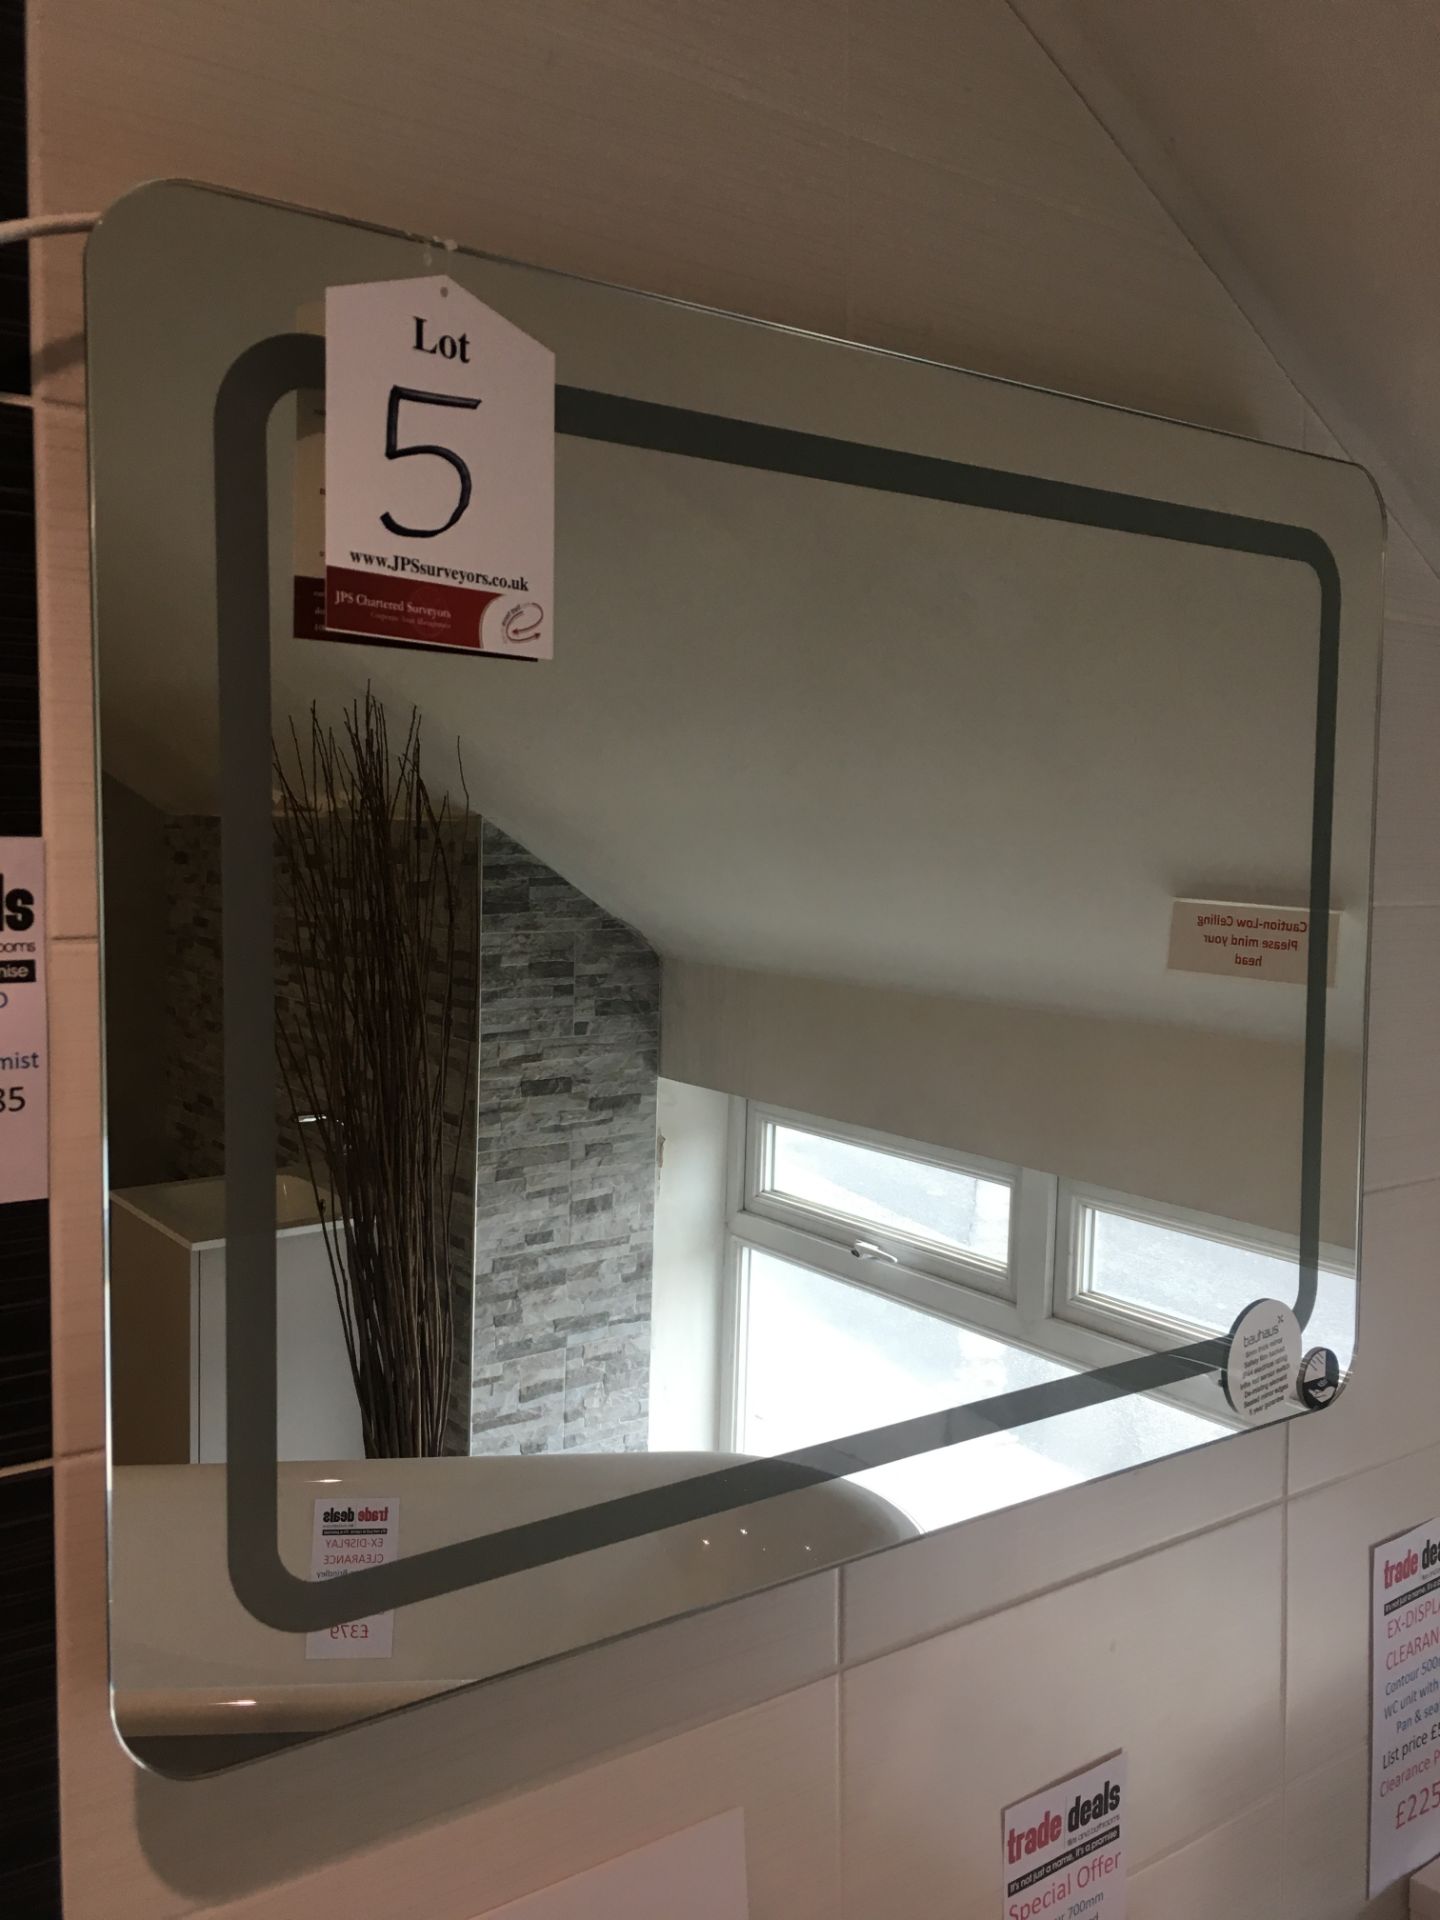 Bauhaus celeste LED backlit mirror w/ infra-red switch and demist£285 reduced to £239